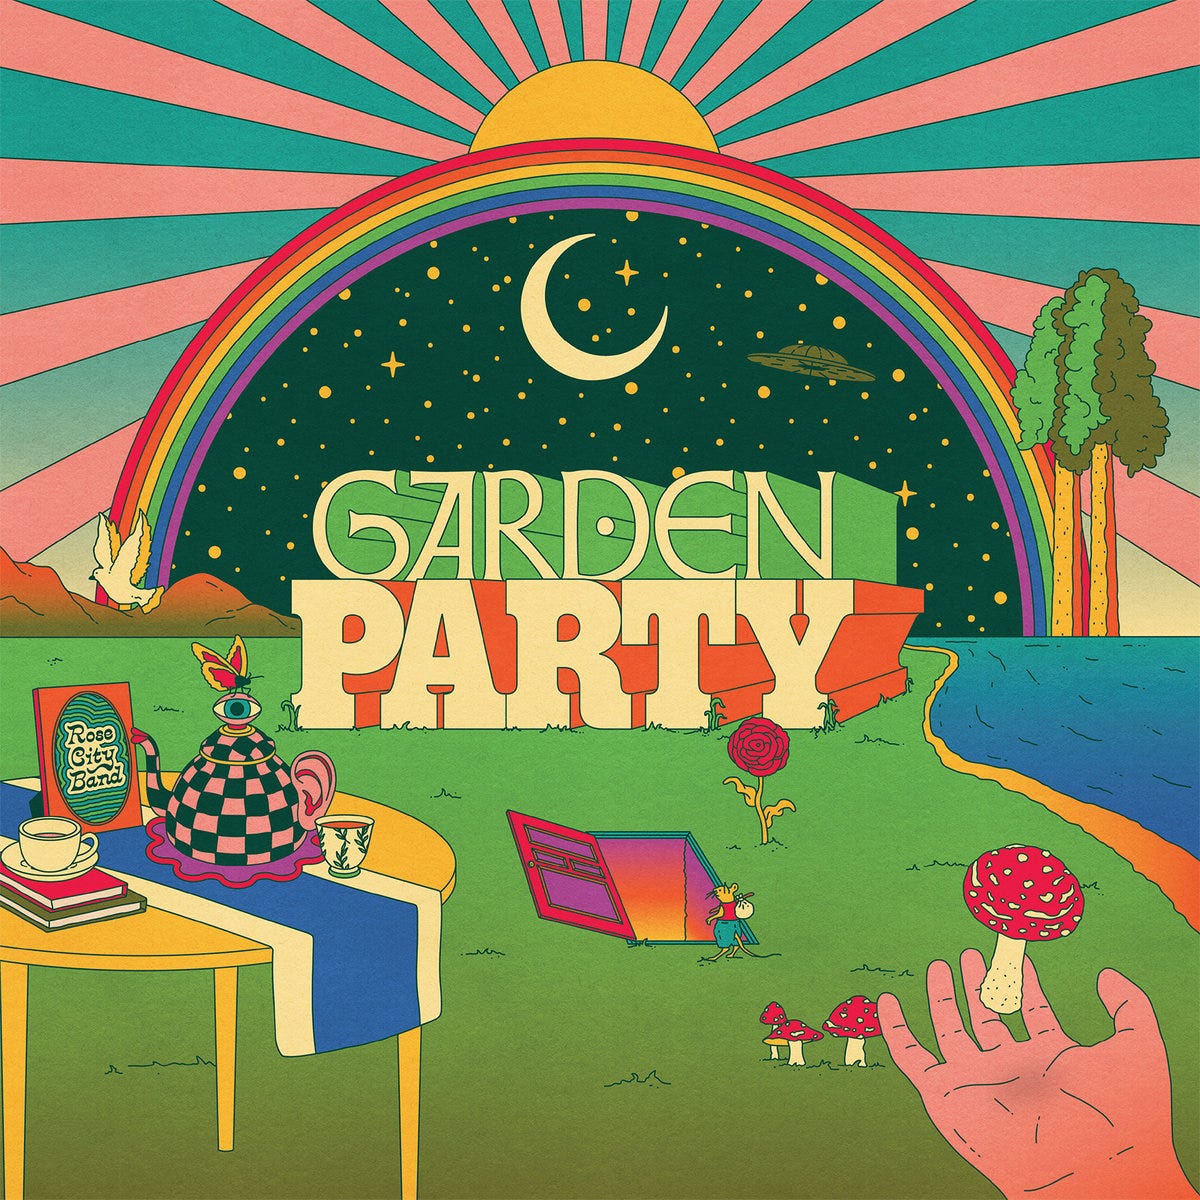 Rose City Band - Garden Party - Album Review | Loud And Quiet